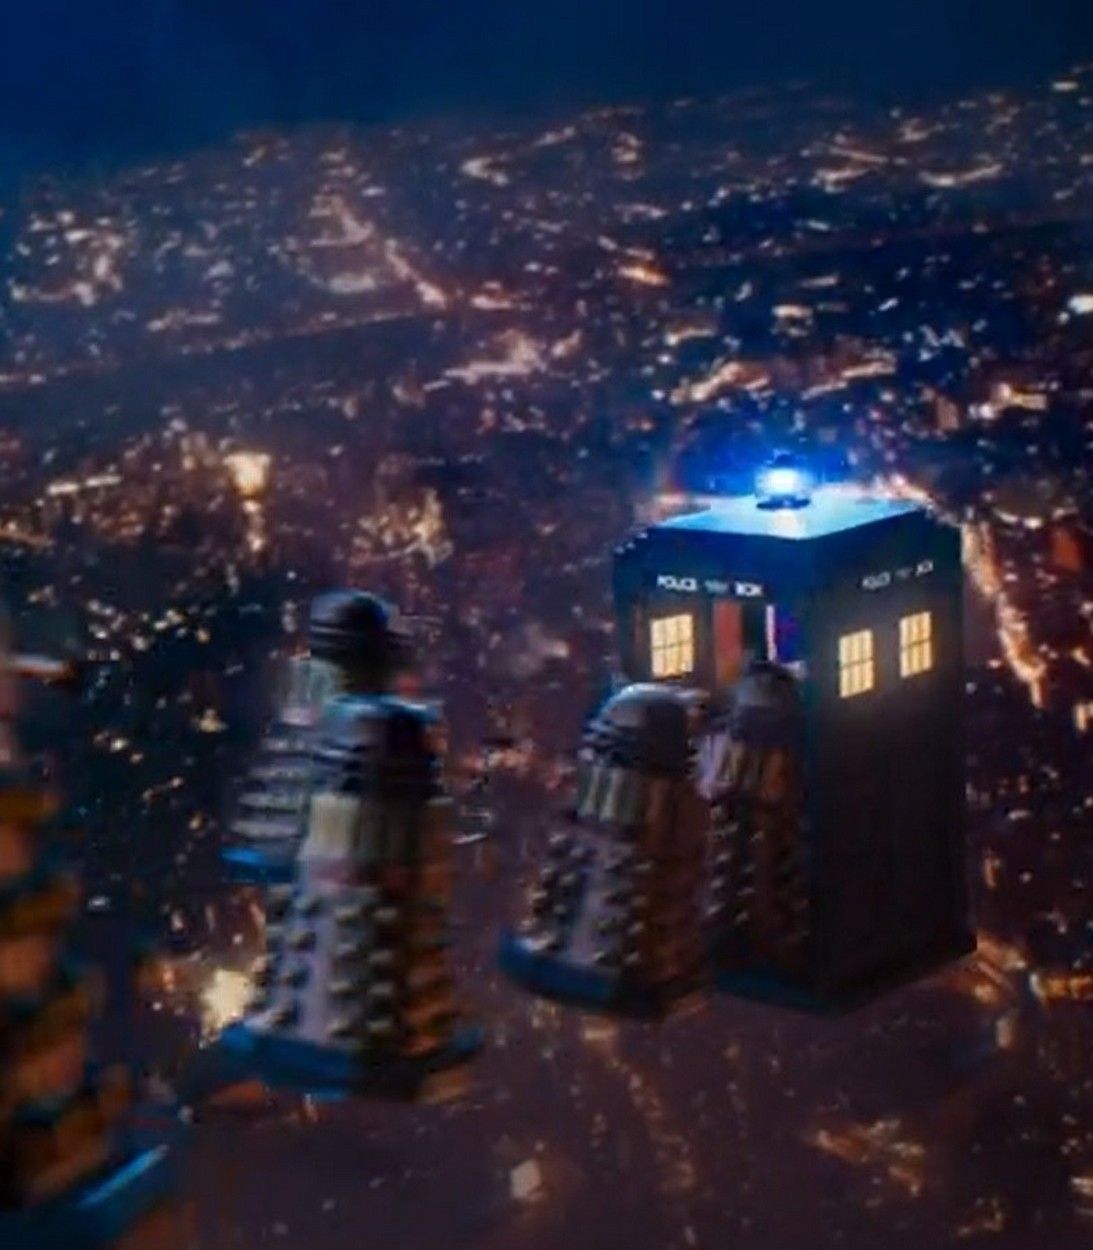 Daleks and TARDIS in Doctor Who vertical